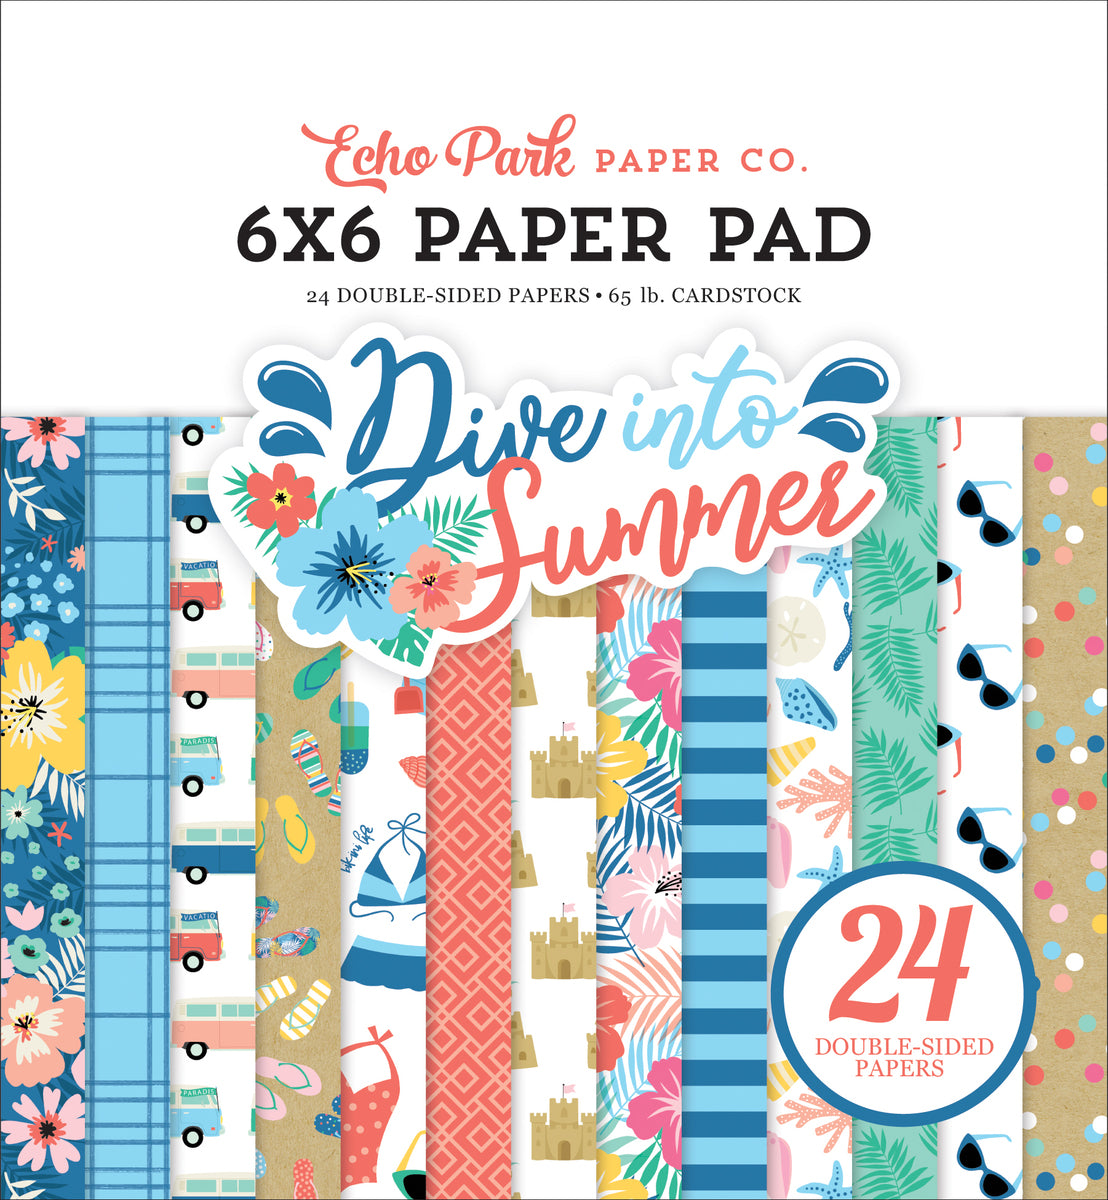 Dive Into Summer - 6x6 paper pad with 24 double-sided sheets - Echo Park Paper